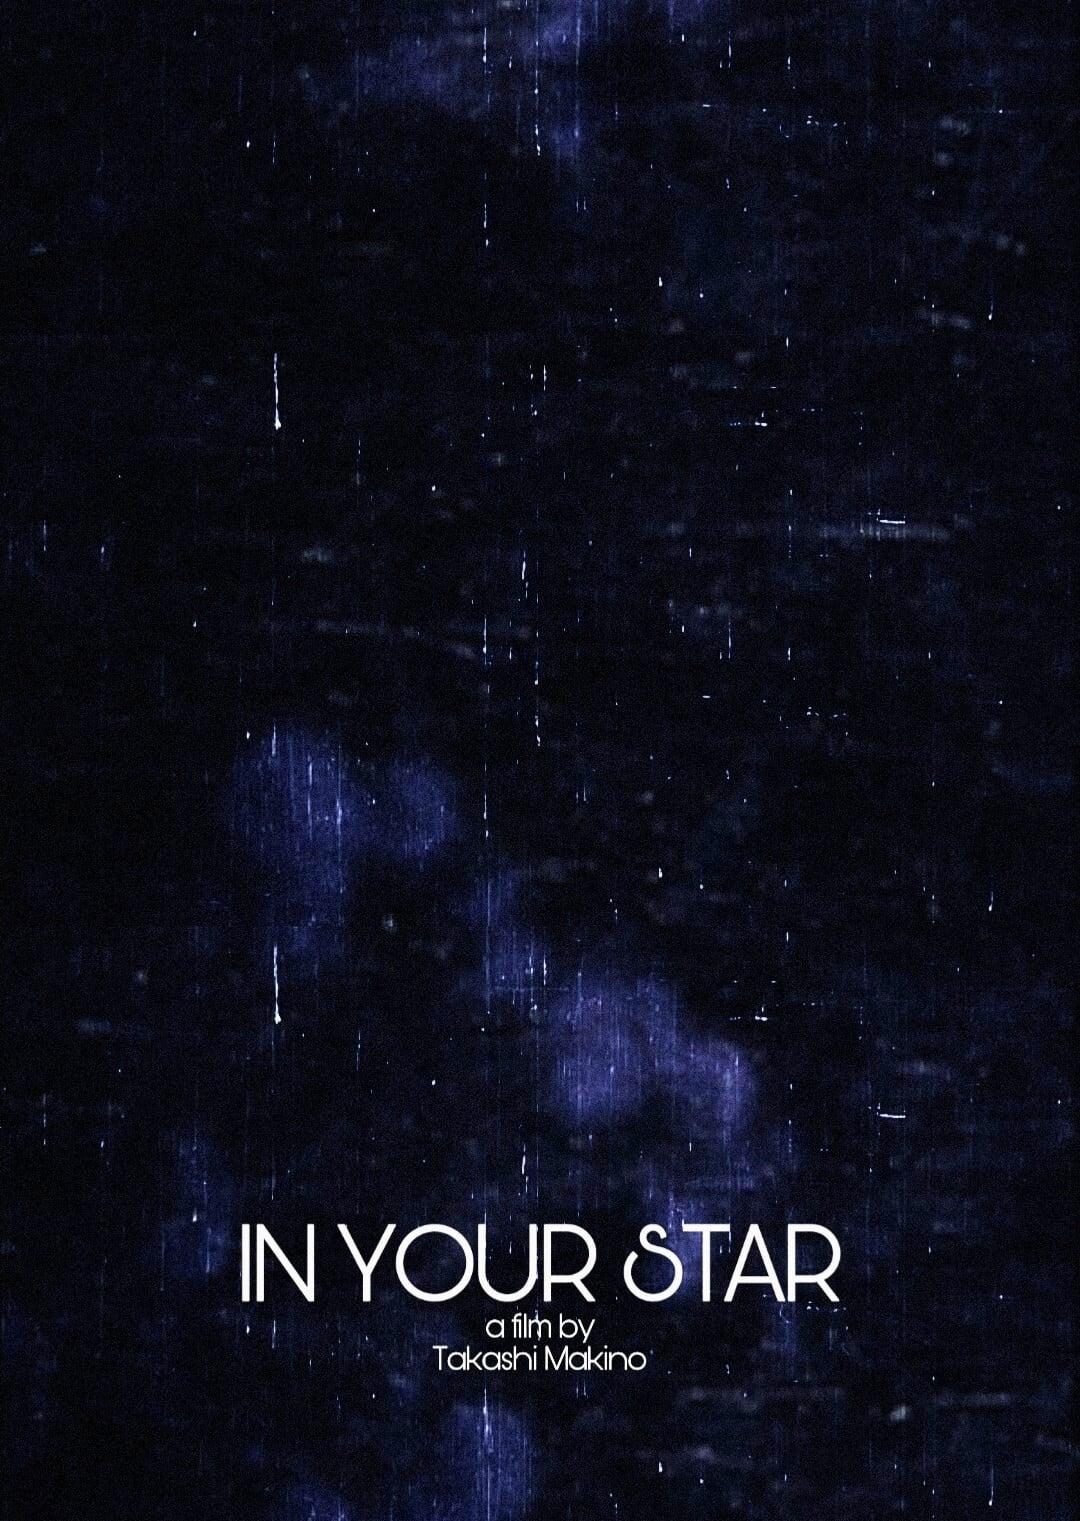 In your star